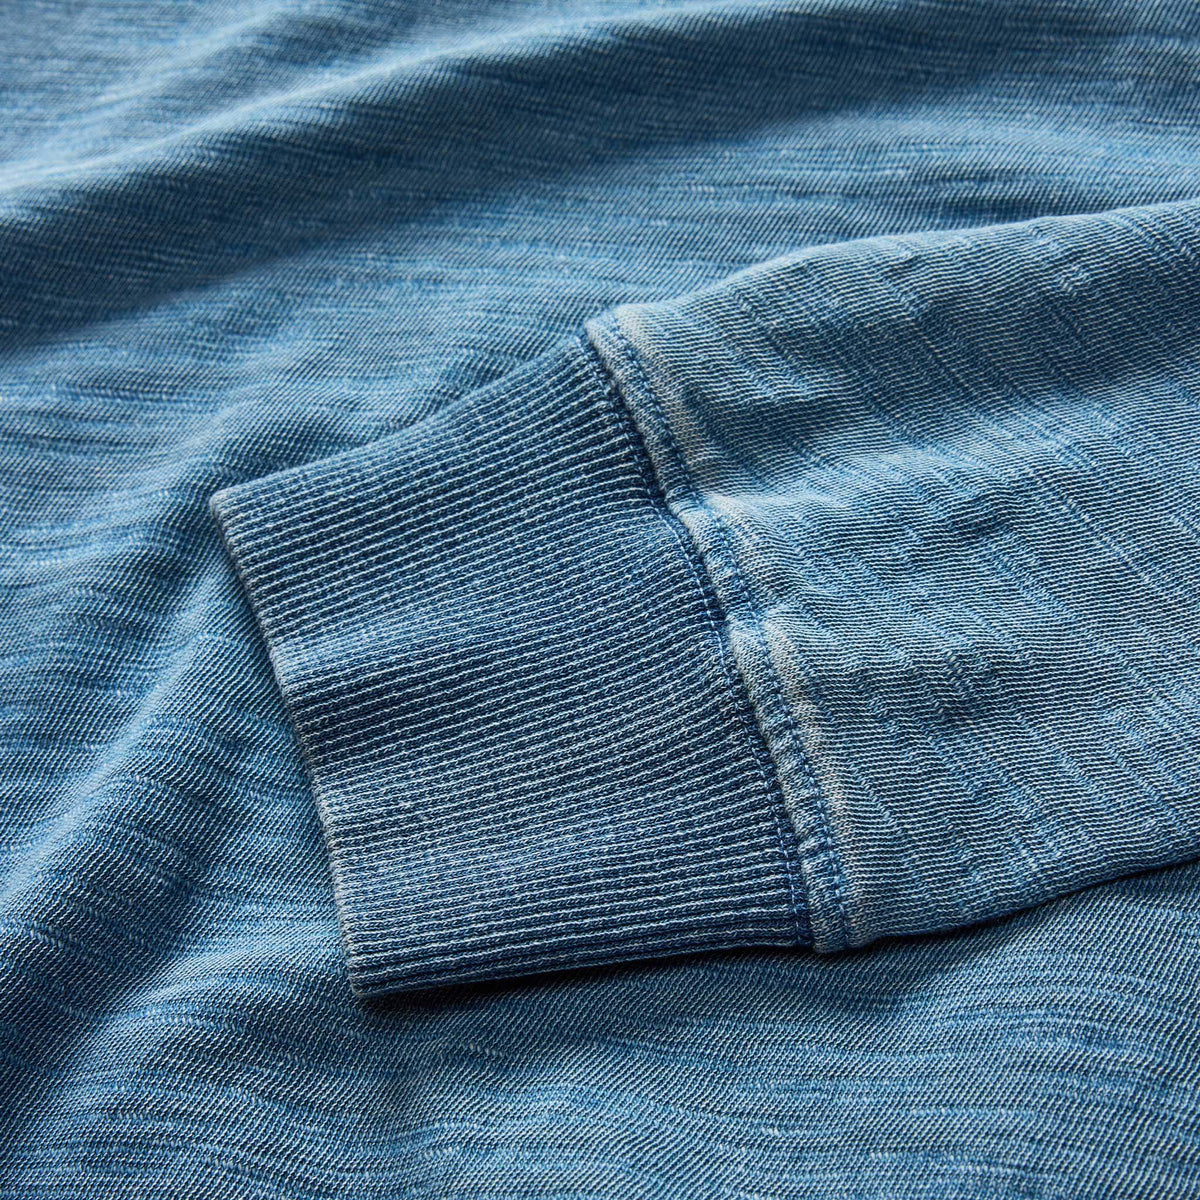 The Organic Cotton Henley in Washed Indigo